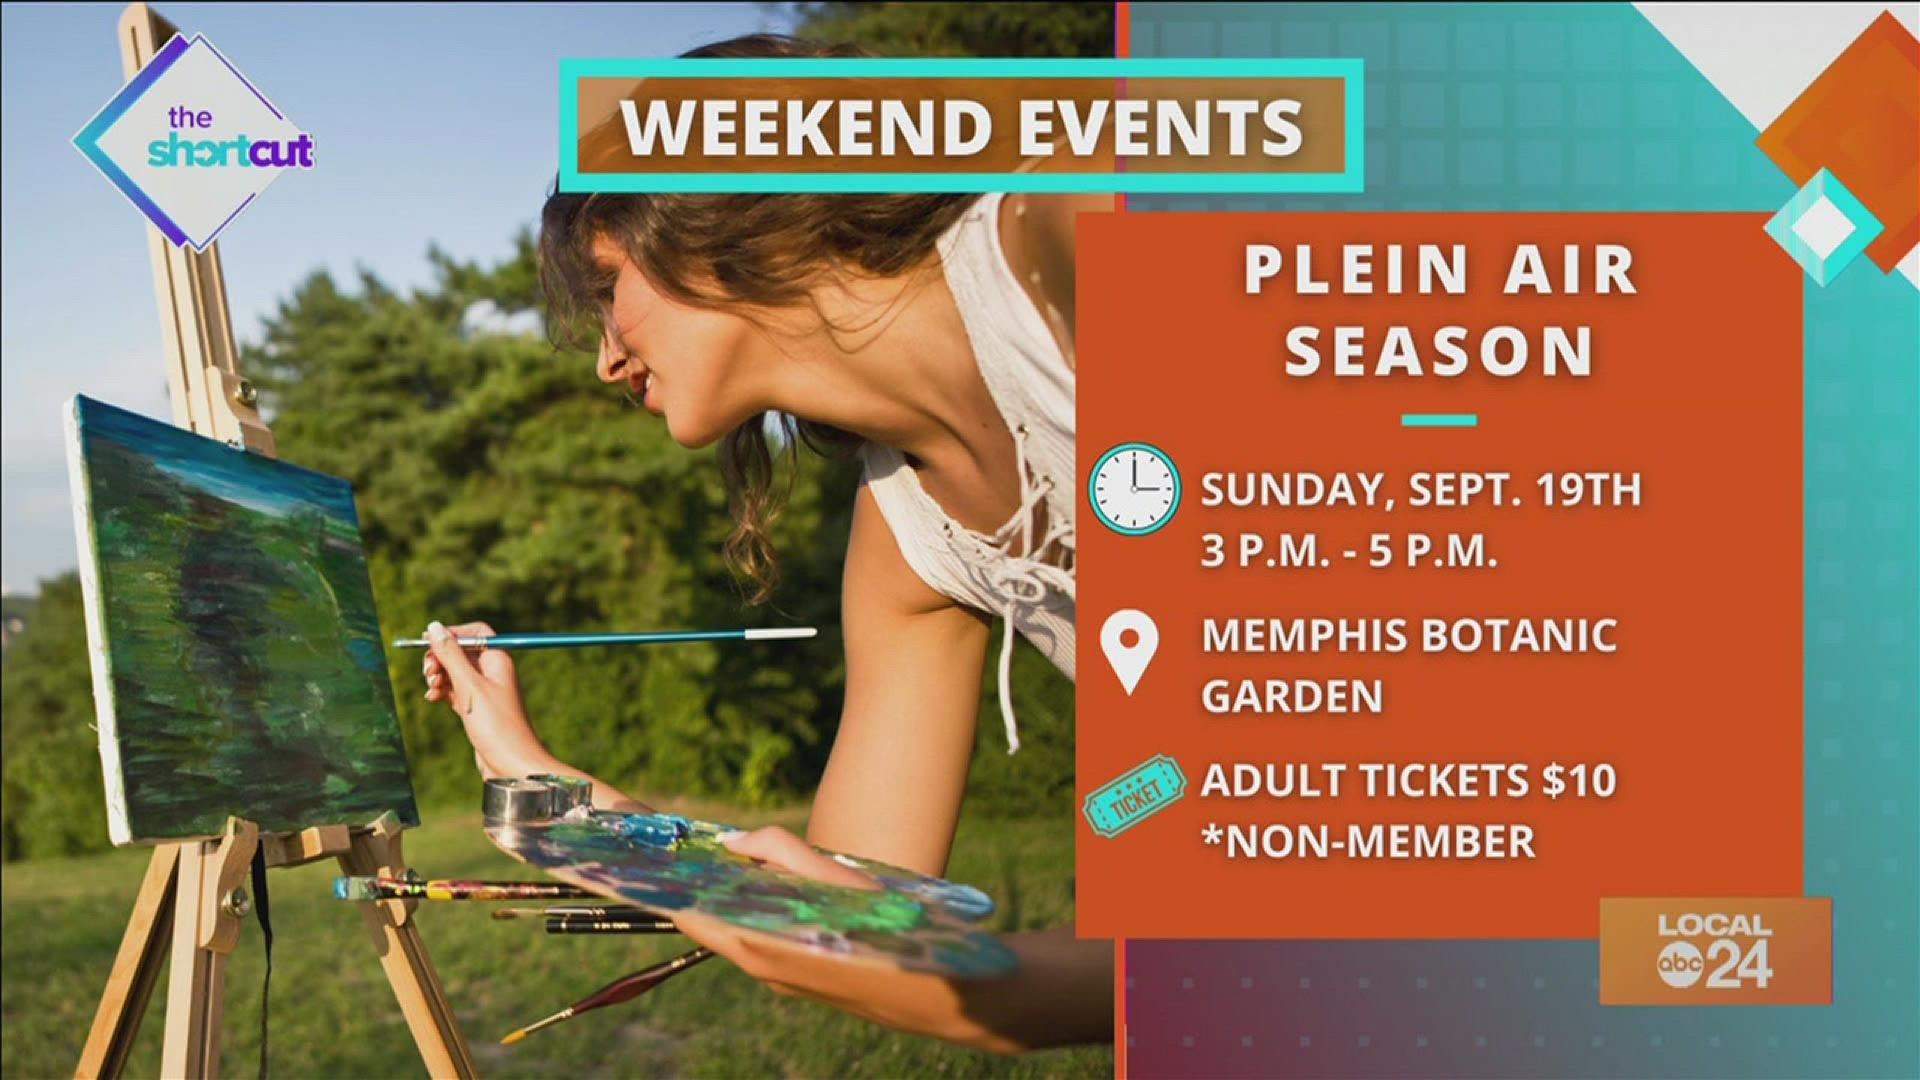 Looking for something to do during your September weekends? From movie nights to Sneaker Fest to outdoor painting at the garden, check out these fun Memphis events!